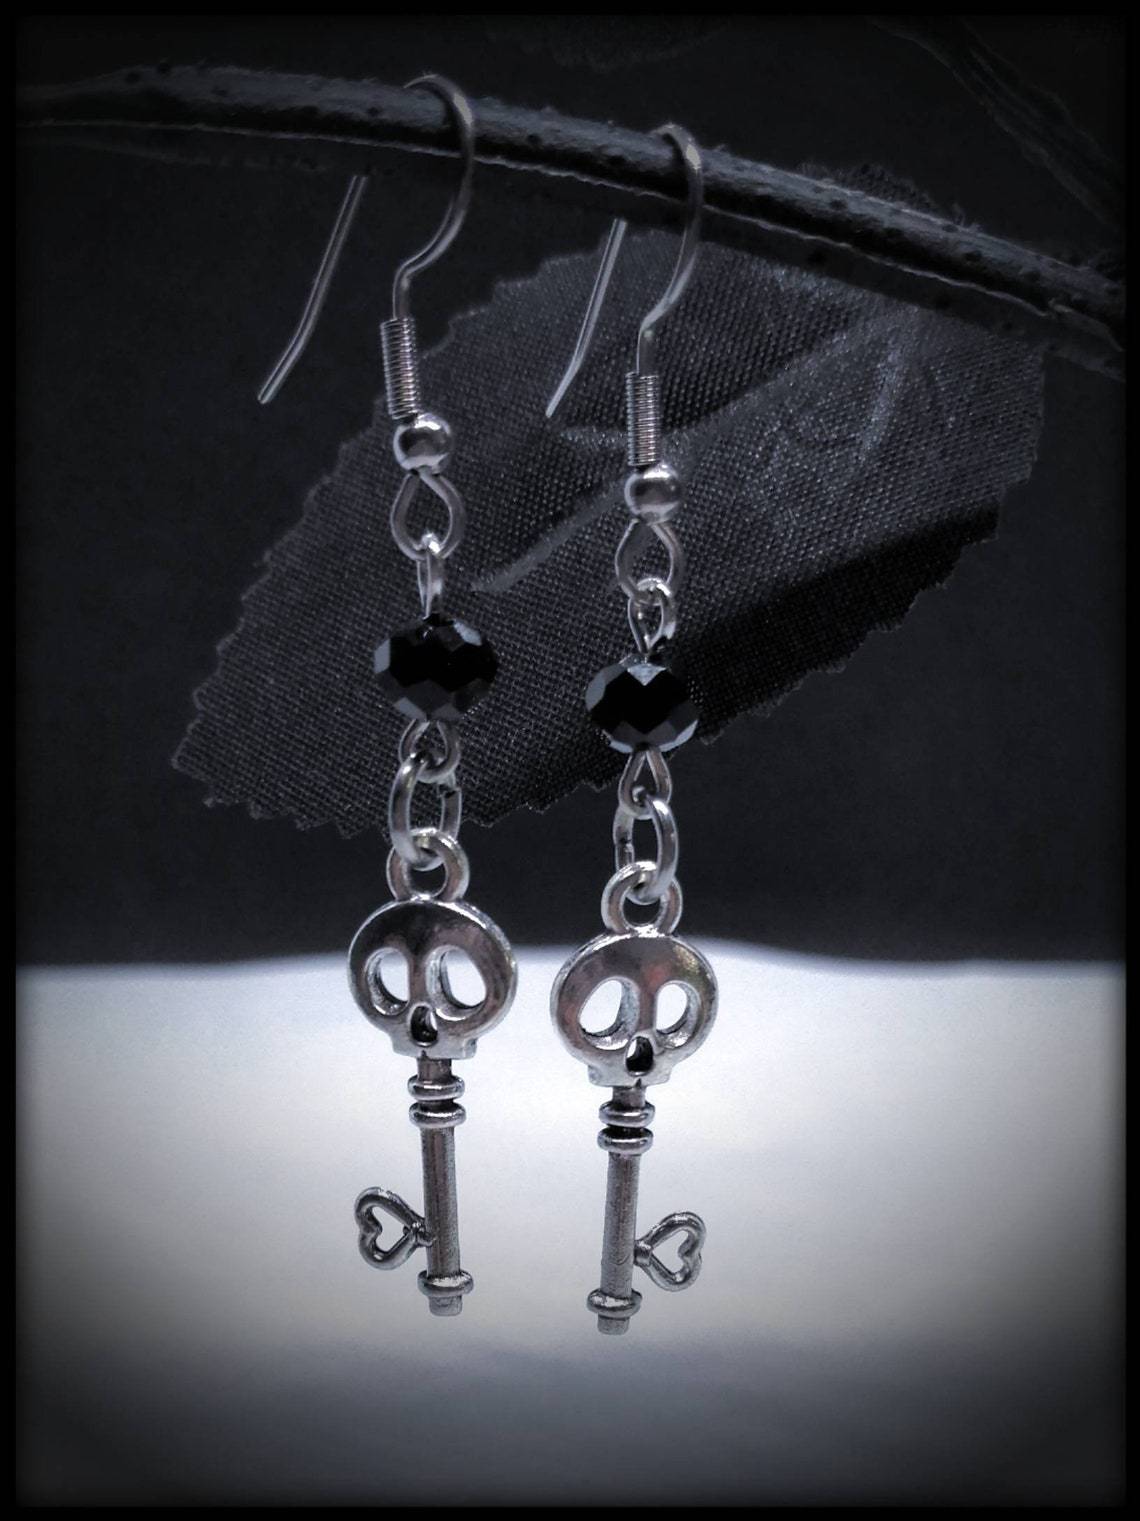 A pair of CJ Fashion Gothic Skull Earrings Jewelry Gift with a key on them.